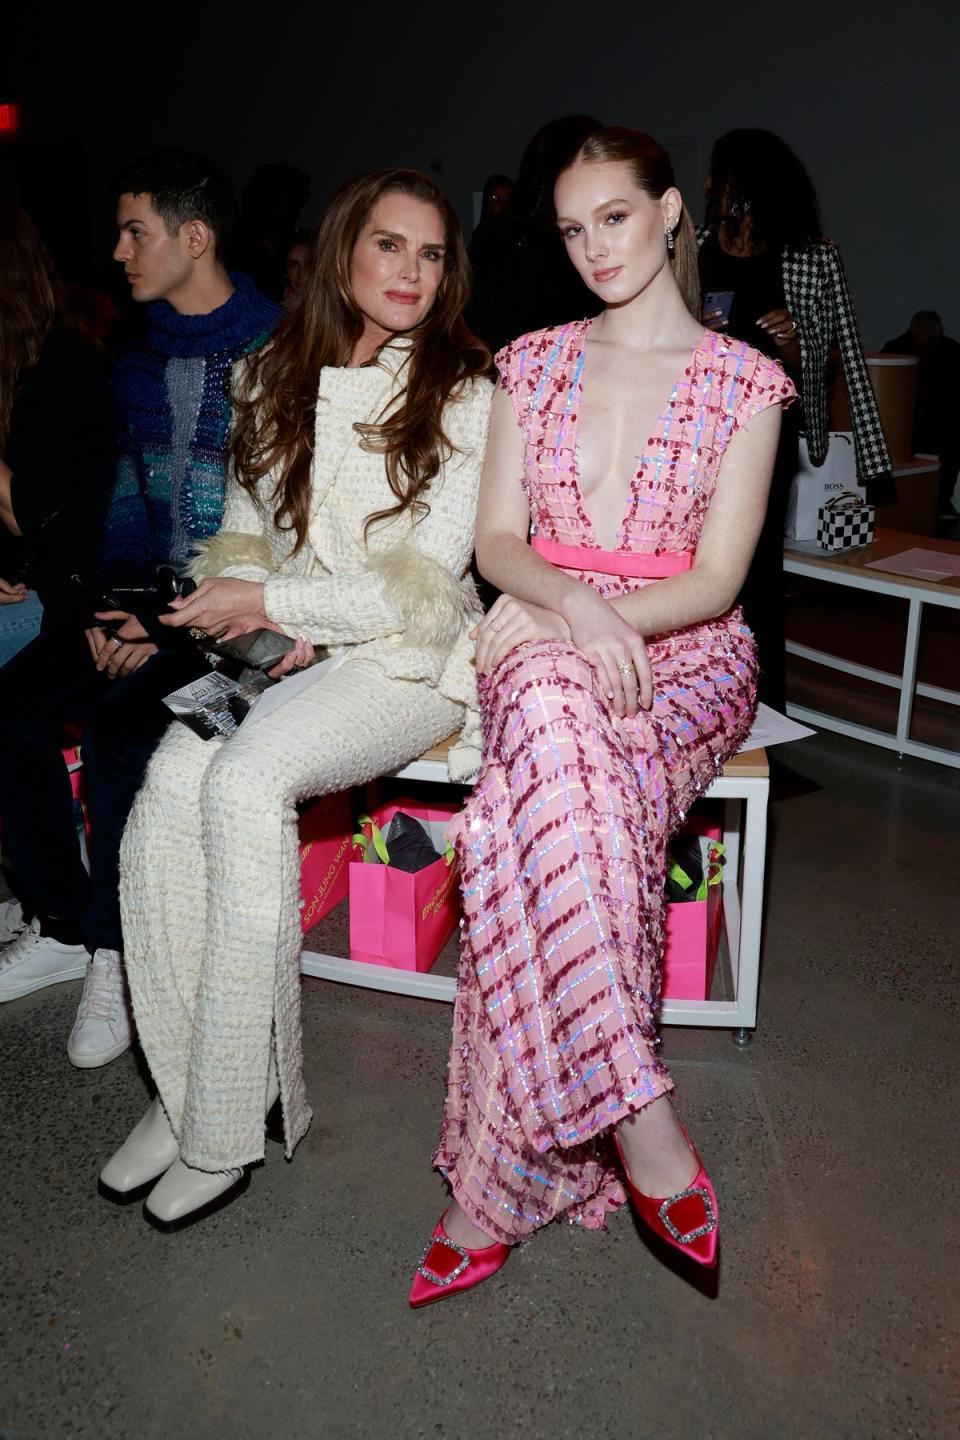 Brooke Shields and Grier Henchy attend the Son Jung Wan show (Getty Images for NYFW: The Shows)